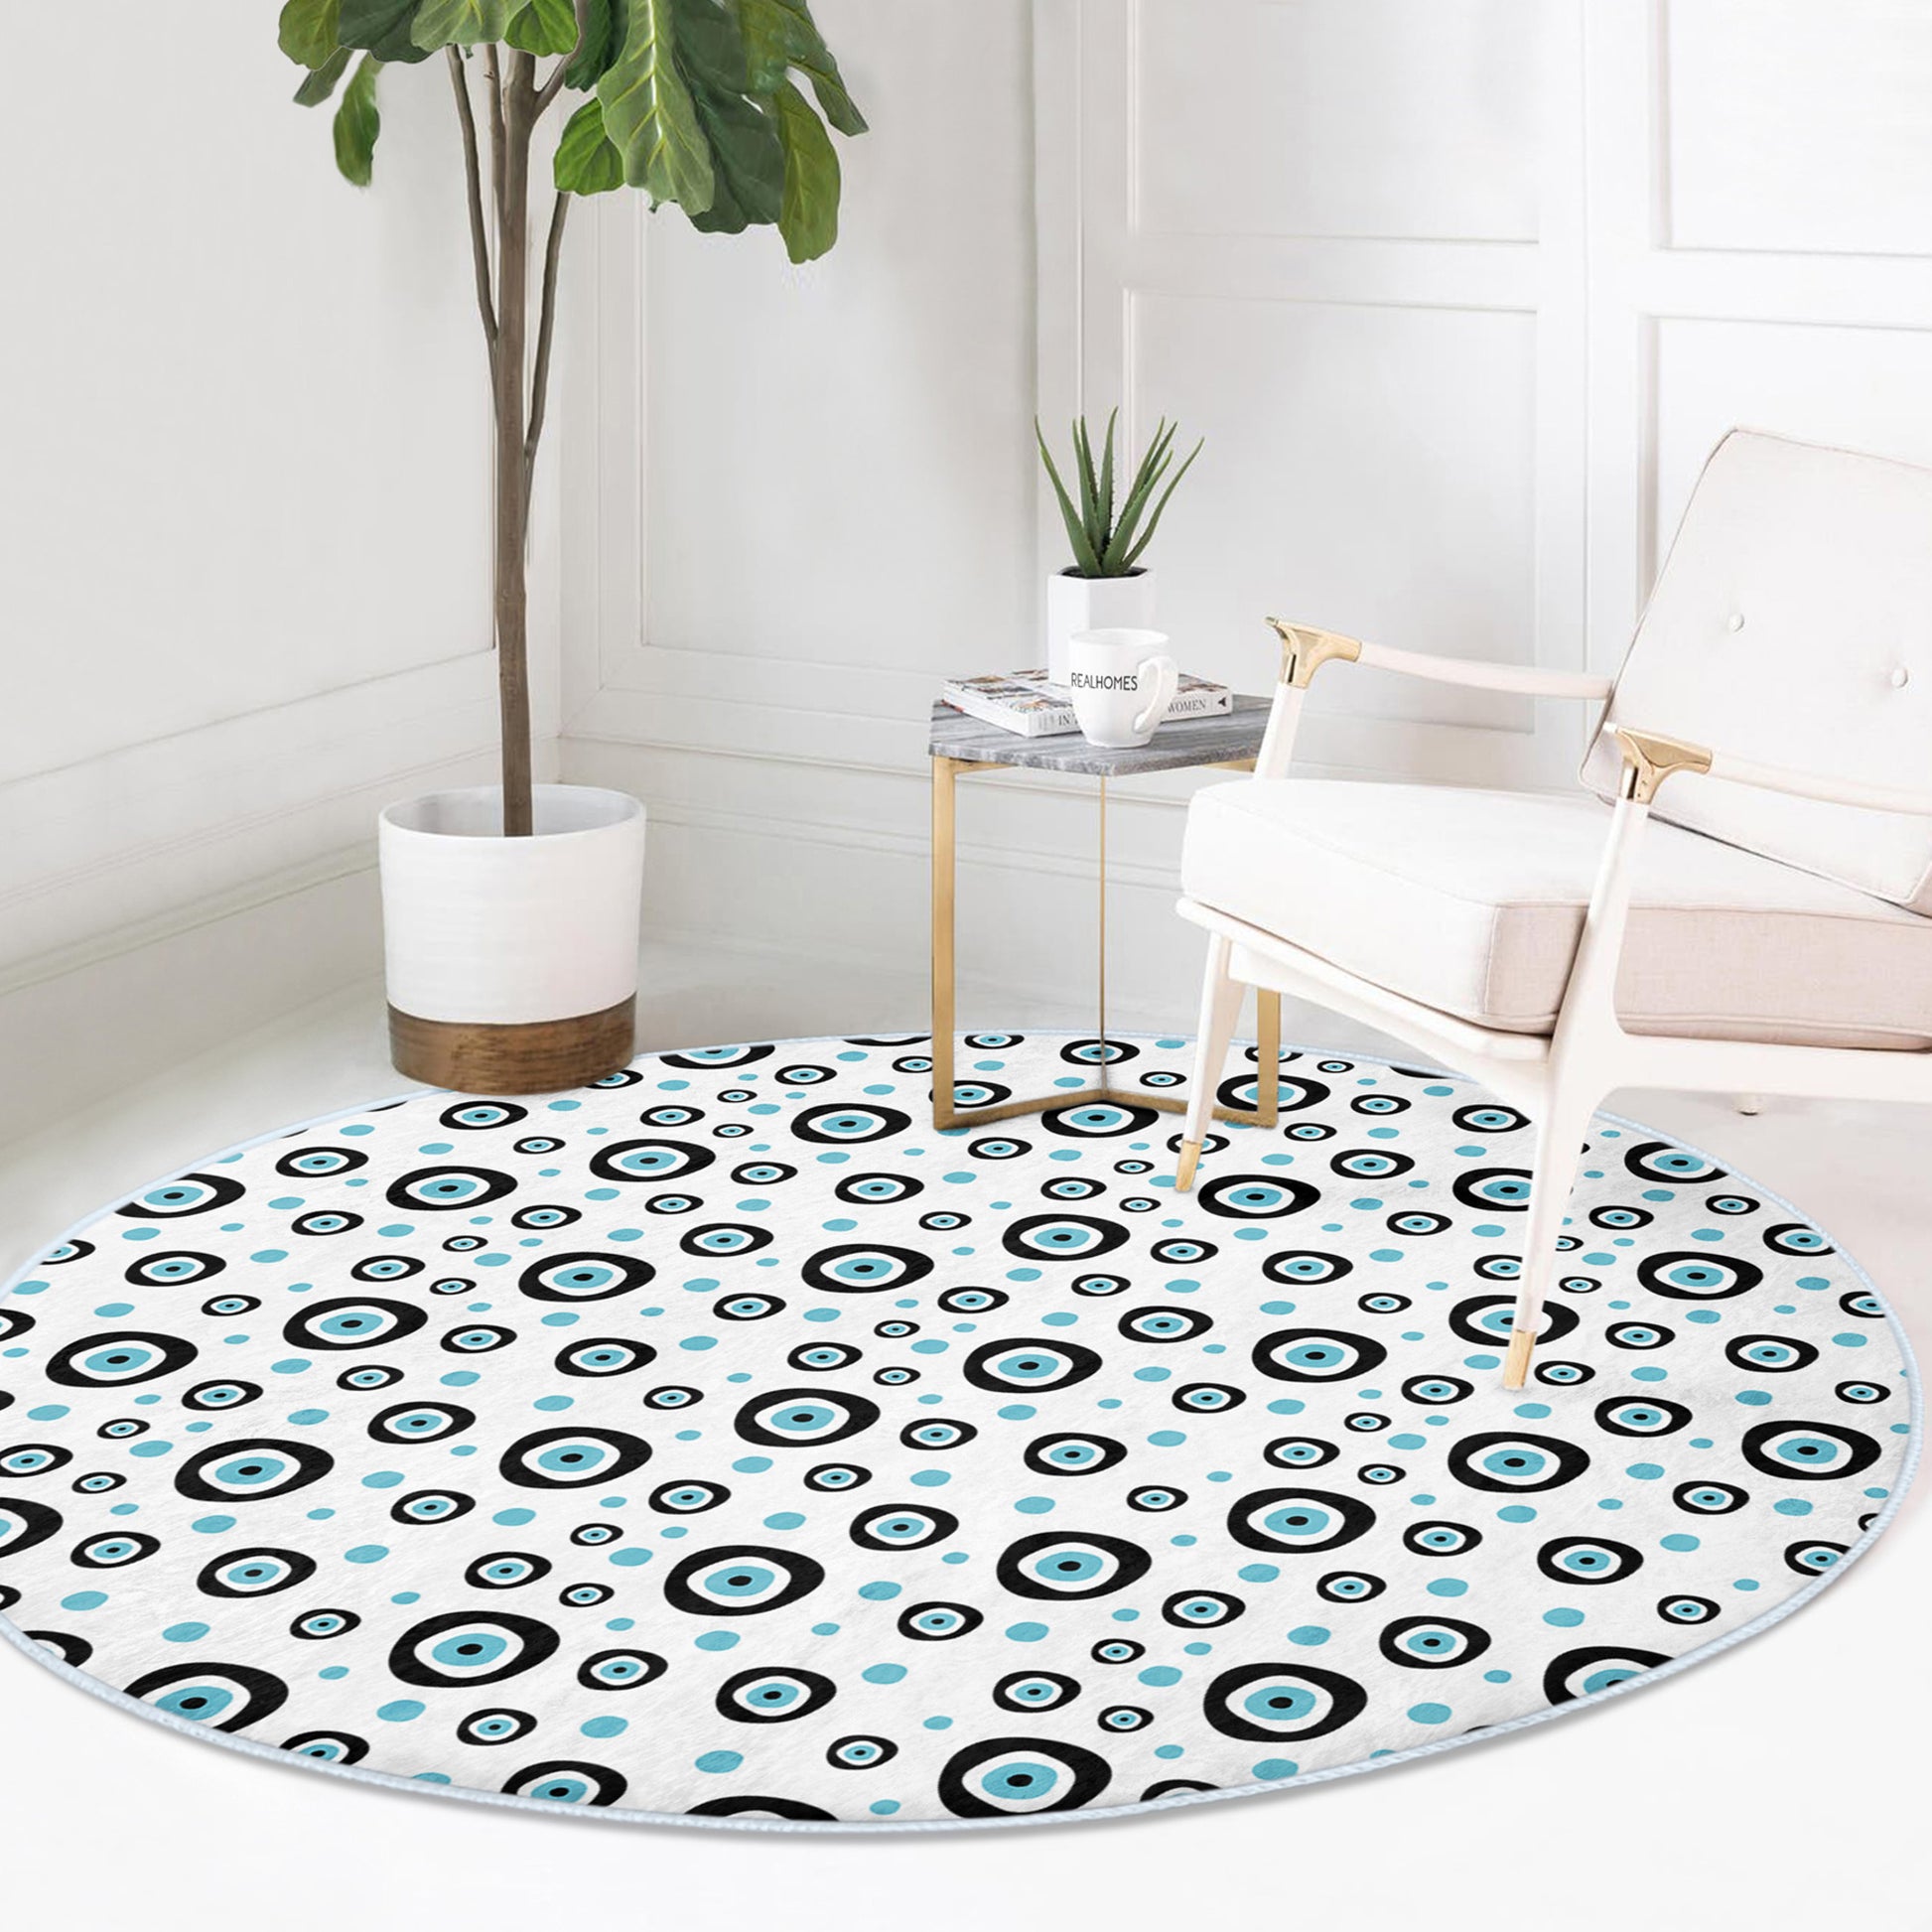 Round Patterned Floor Rug - Intriguing Living Room Accent